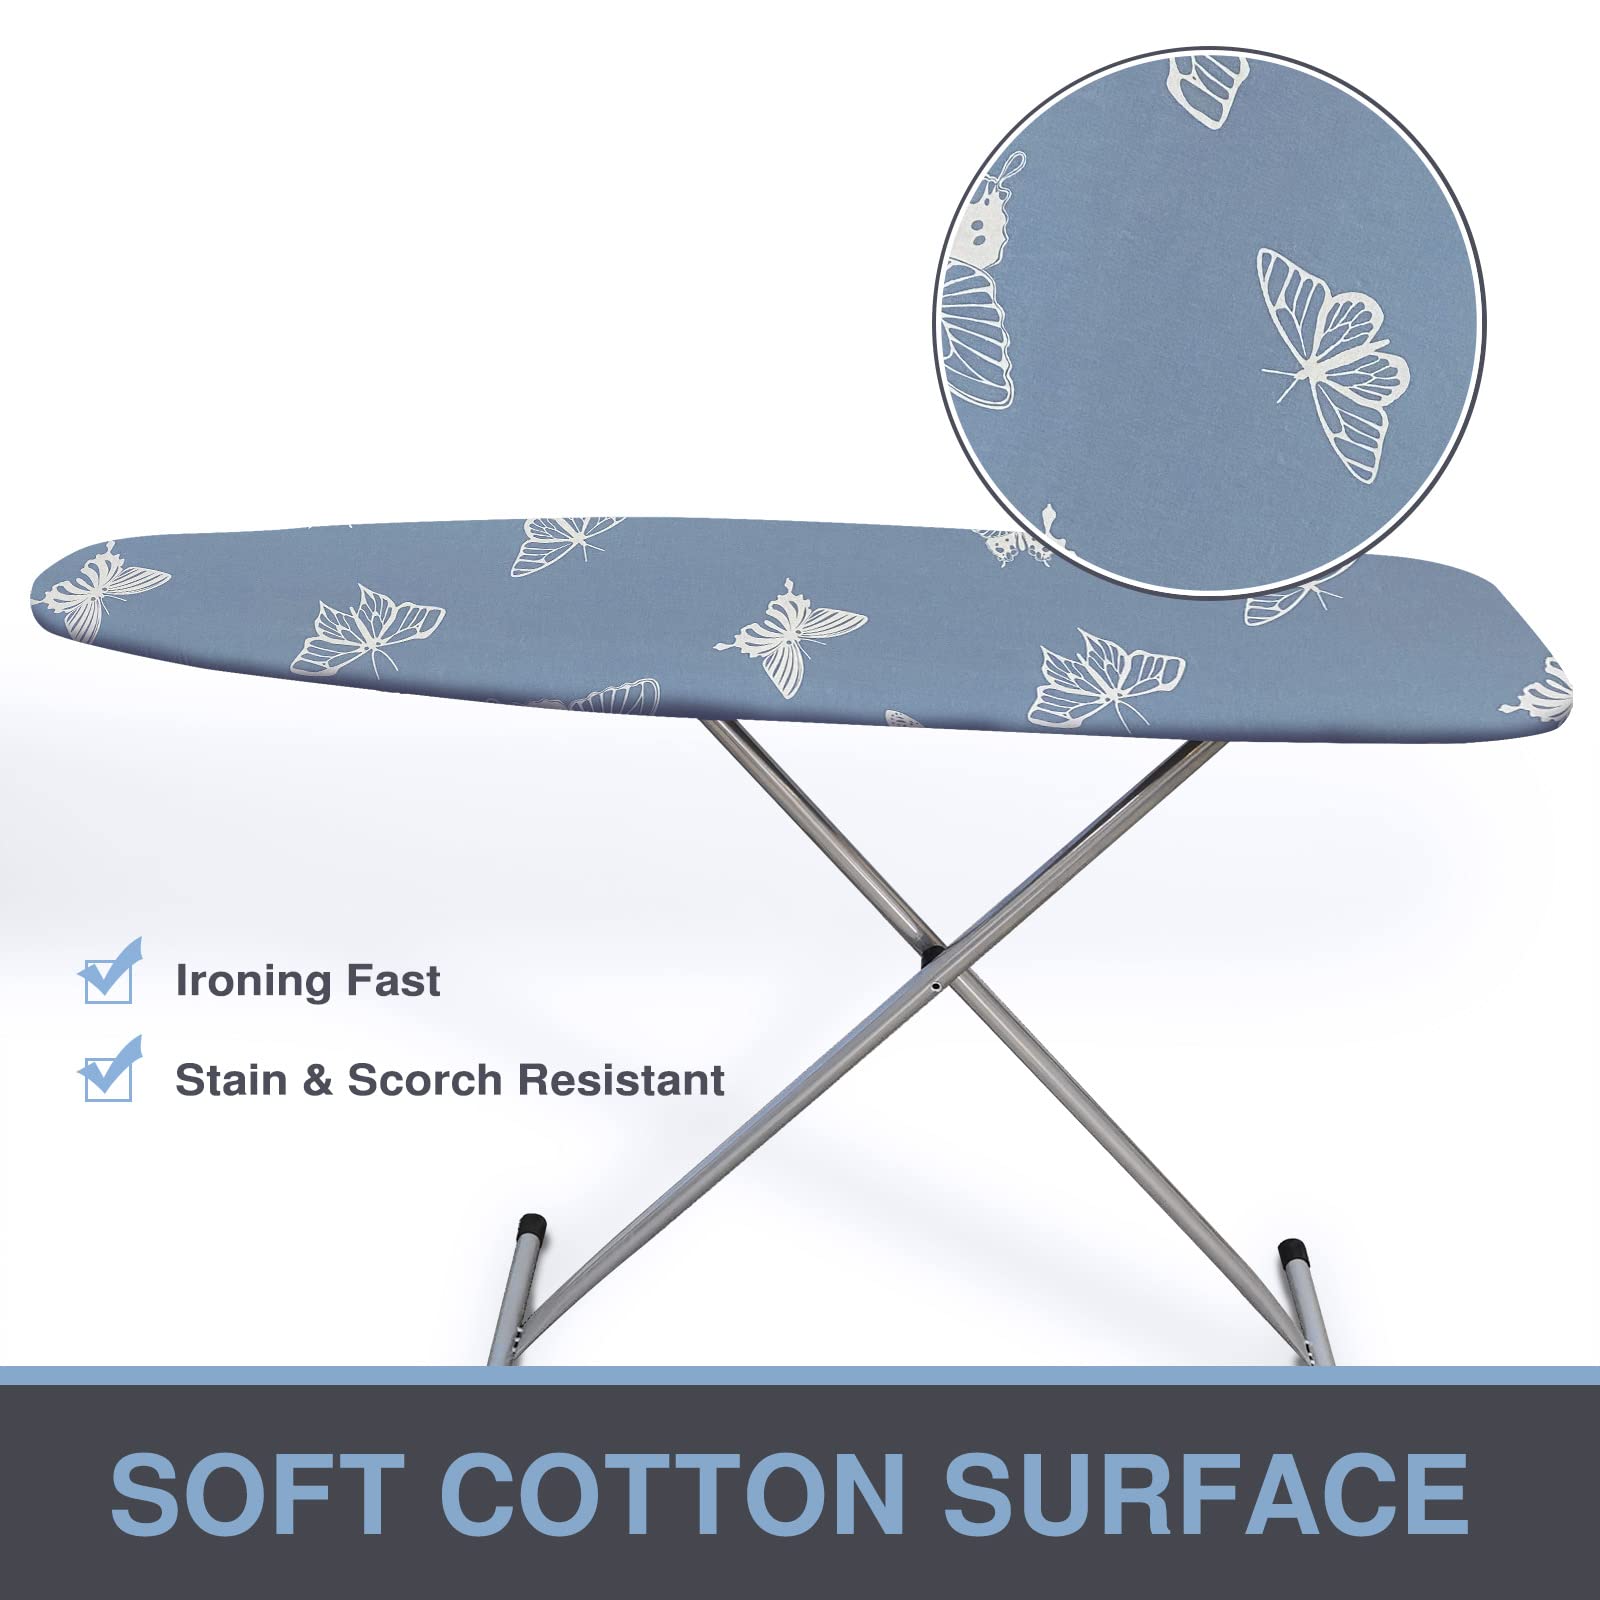 VividPaw Ironing Board Cover and Pad Standard Size 15×54, Value Pack (Blue and Butterfly)